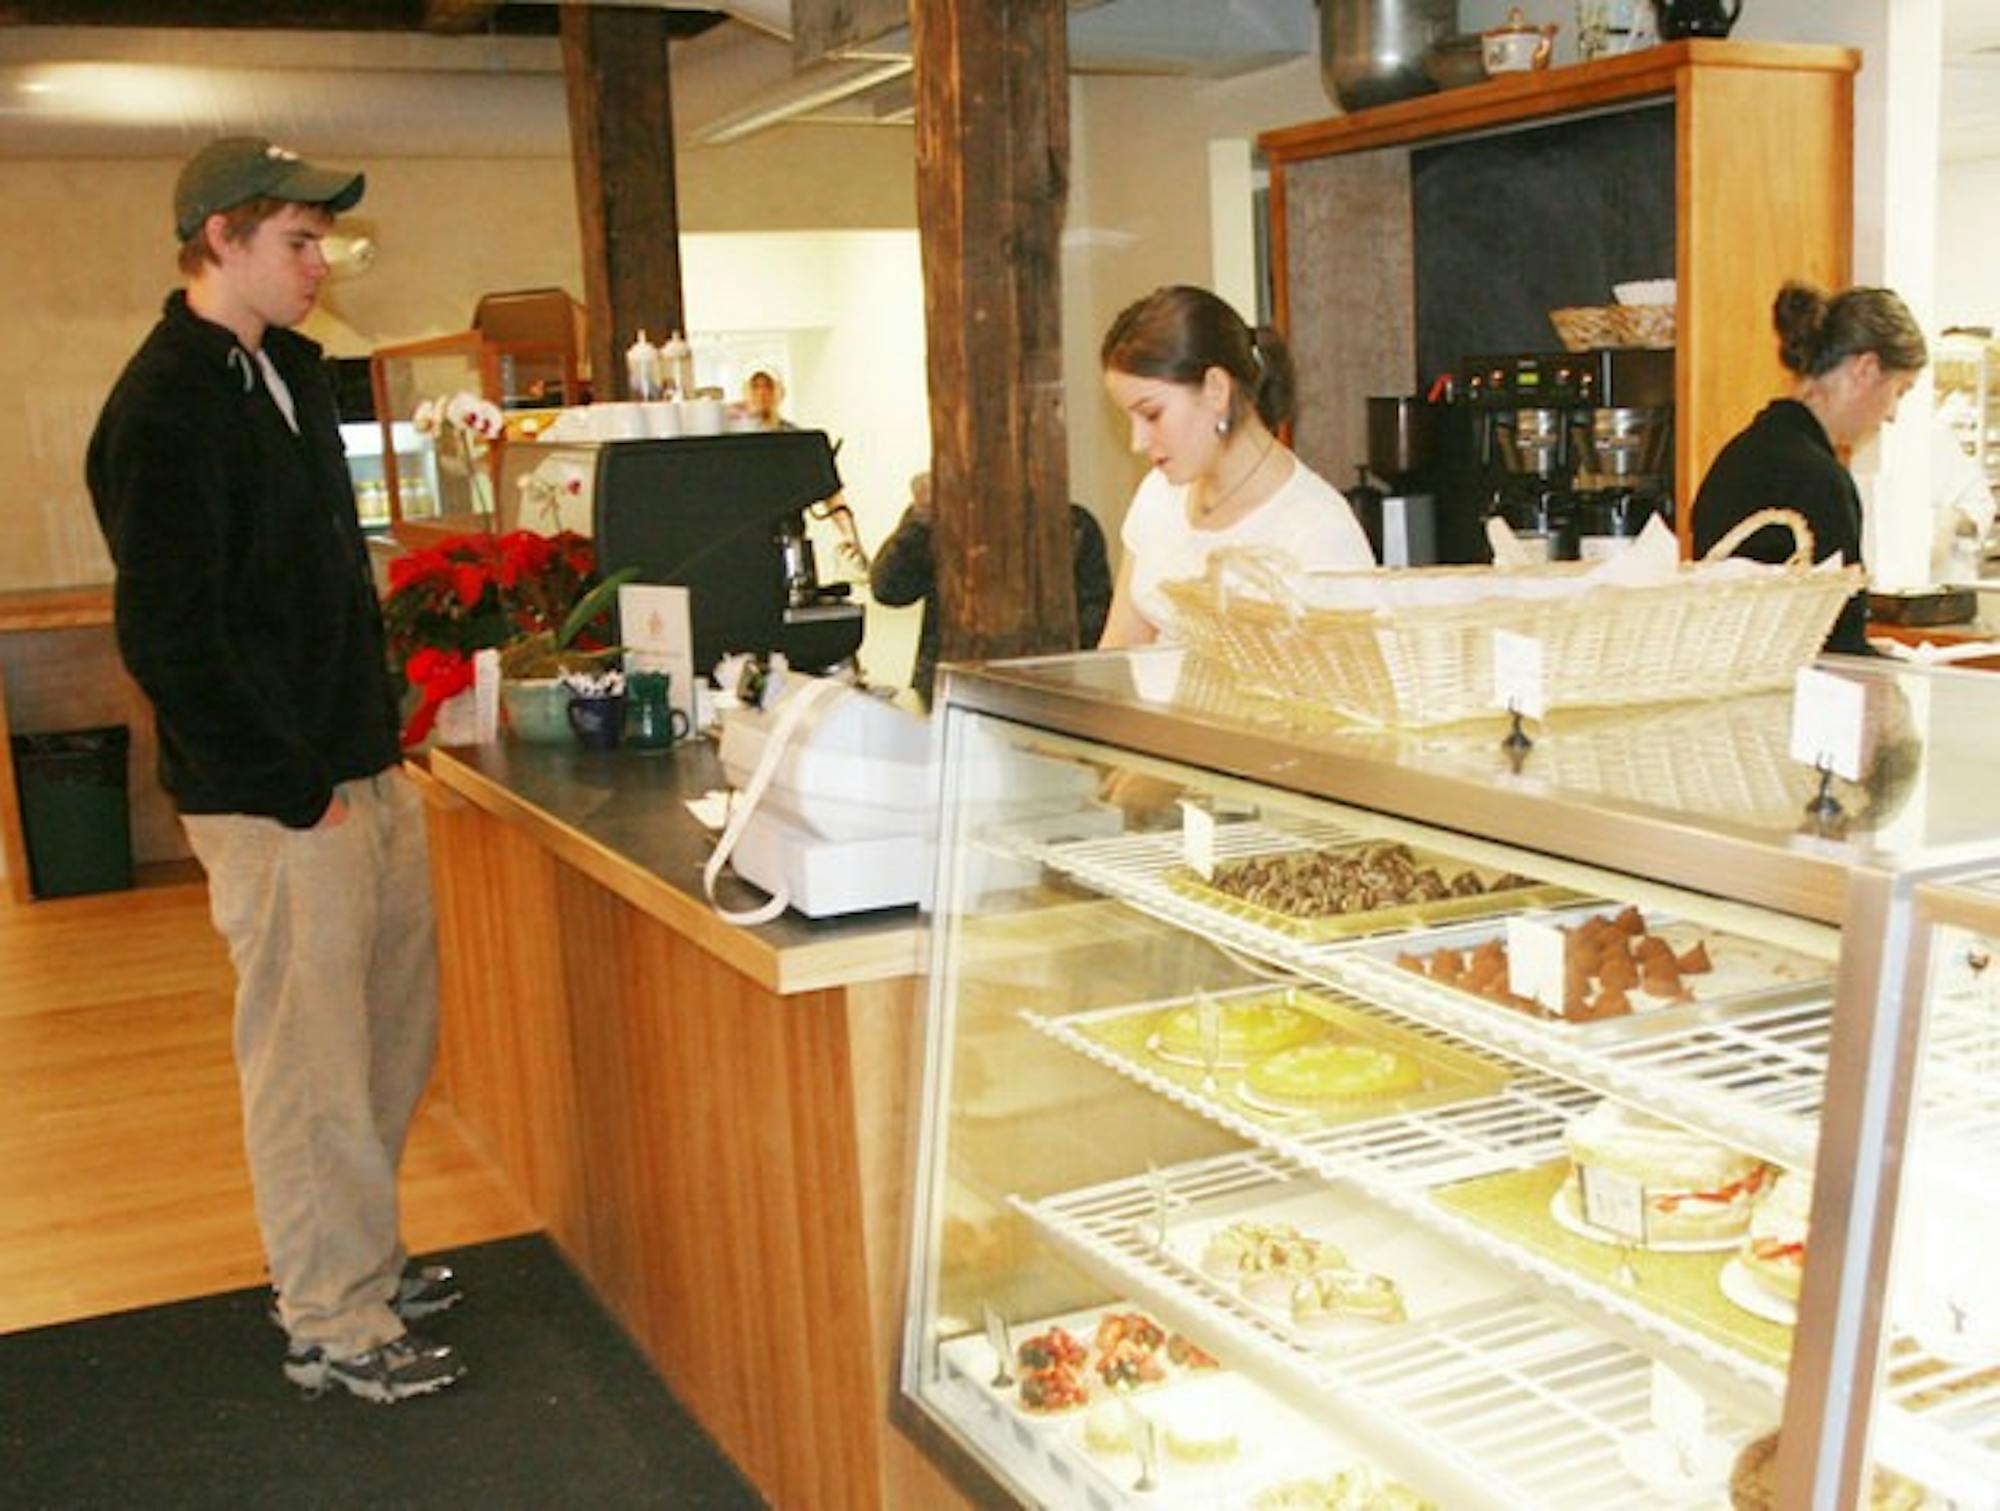 Gabe Mahoney '08 visits Umpleby's Bakery, which opened at 3 South Street over the weekend as 